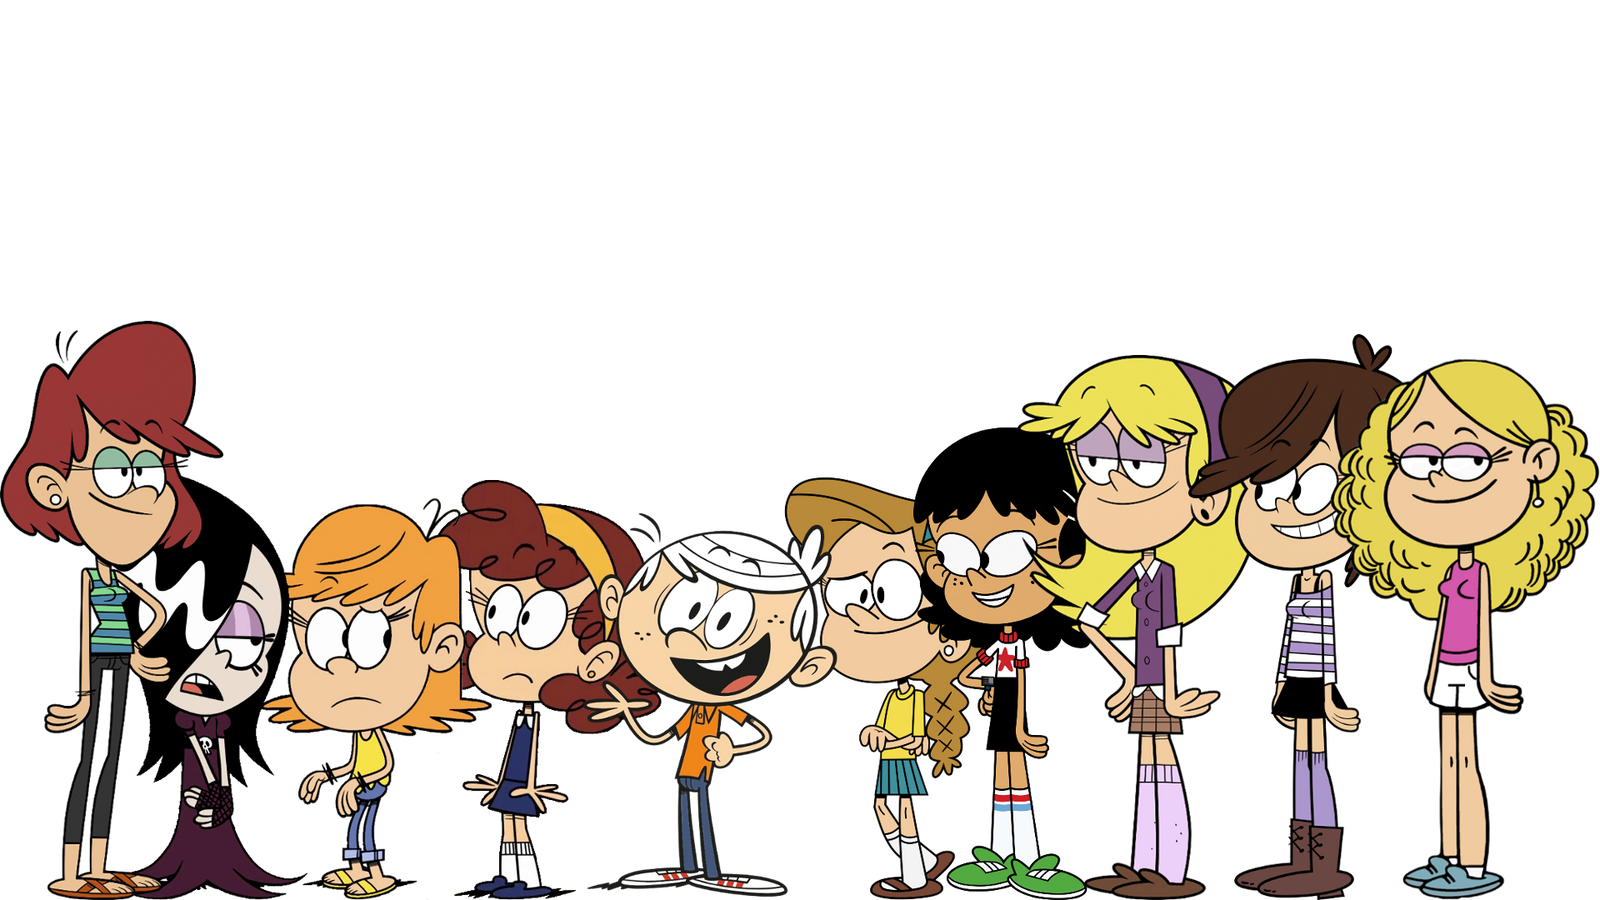 The Louds and the Others like the WBD Lawsuit by chanyhuman on DeviantArt